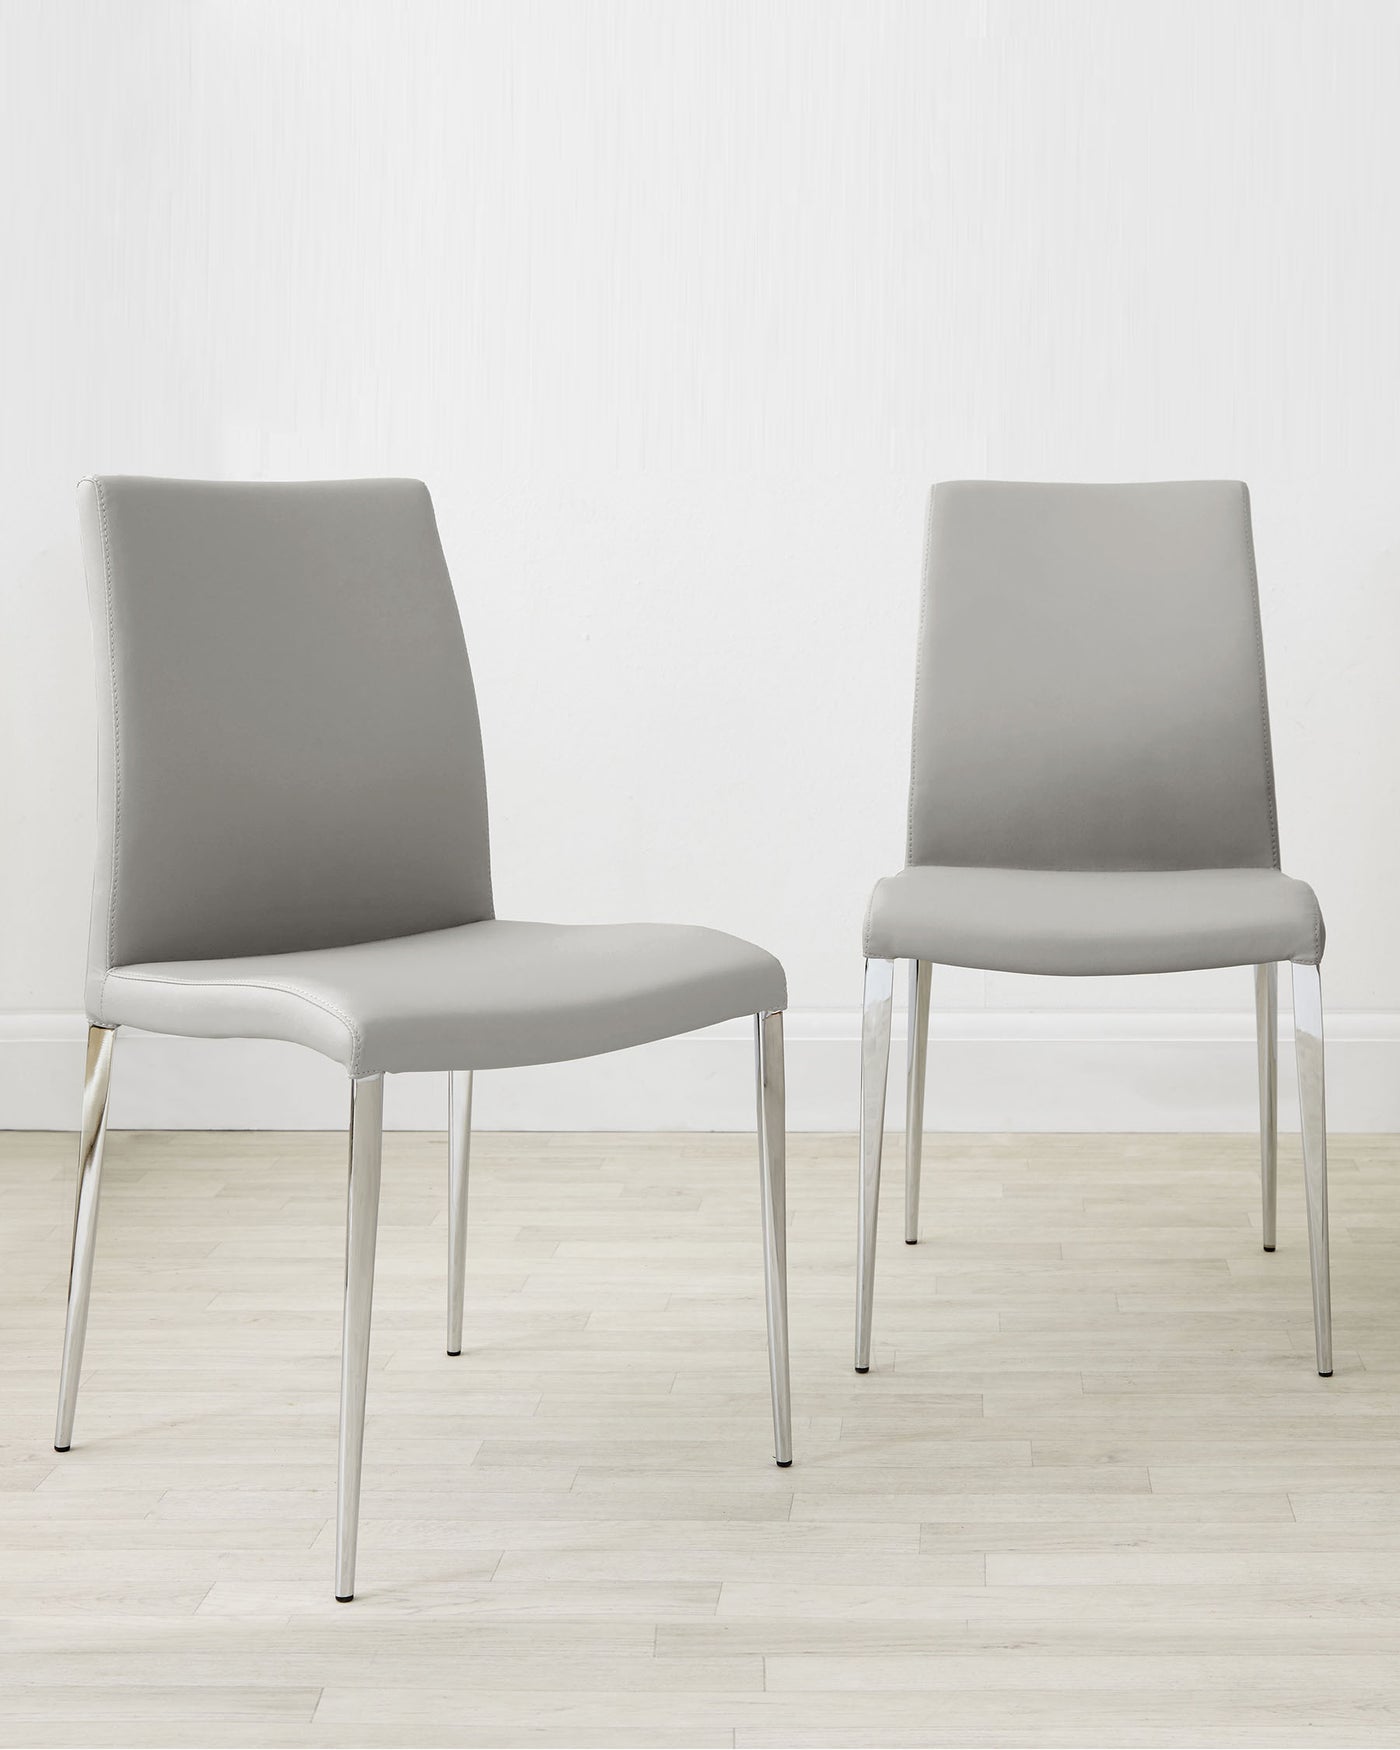 Two modern minimalist dining chairs with light grey upholstery and sleek, silver metal legs, set against a white wall on a light wooden floor.